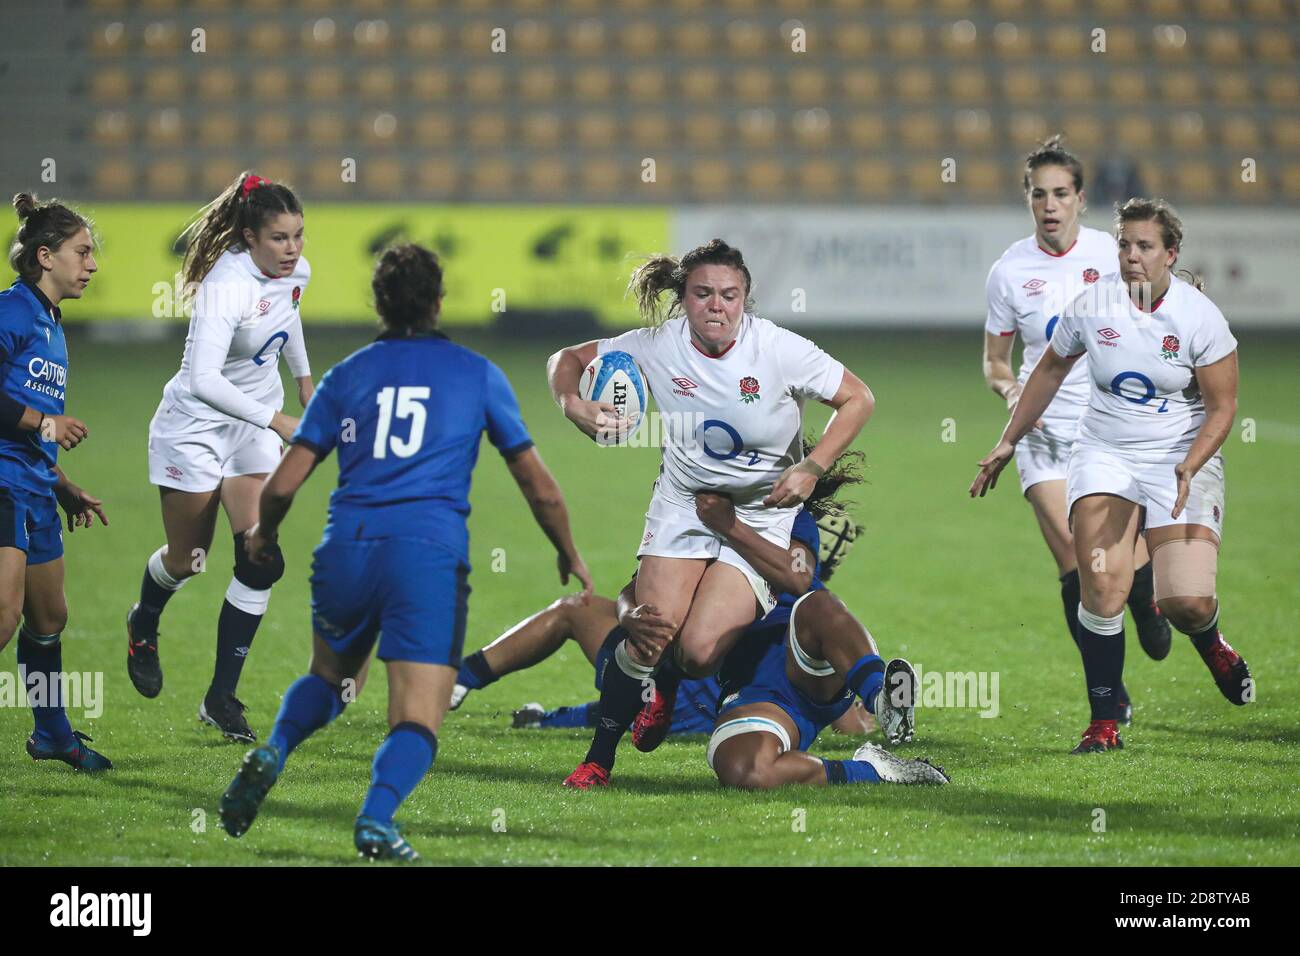 Parma, Italy. 1st Nov, 2020. parma, Italy, Sergio Lanfranchi stadium, 01 Nov 2020, Sarah Bern (England) breaks a double tackle during Women 2020 - Italy vs England - Rugby Six Nations match - Credit: LM/Massimiliano Carnabuci Credit: Massimiliano Carnabuci/LPS/ZUMA Wire/Alamy Live News Stock Photo